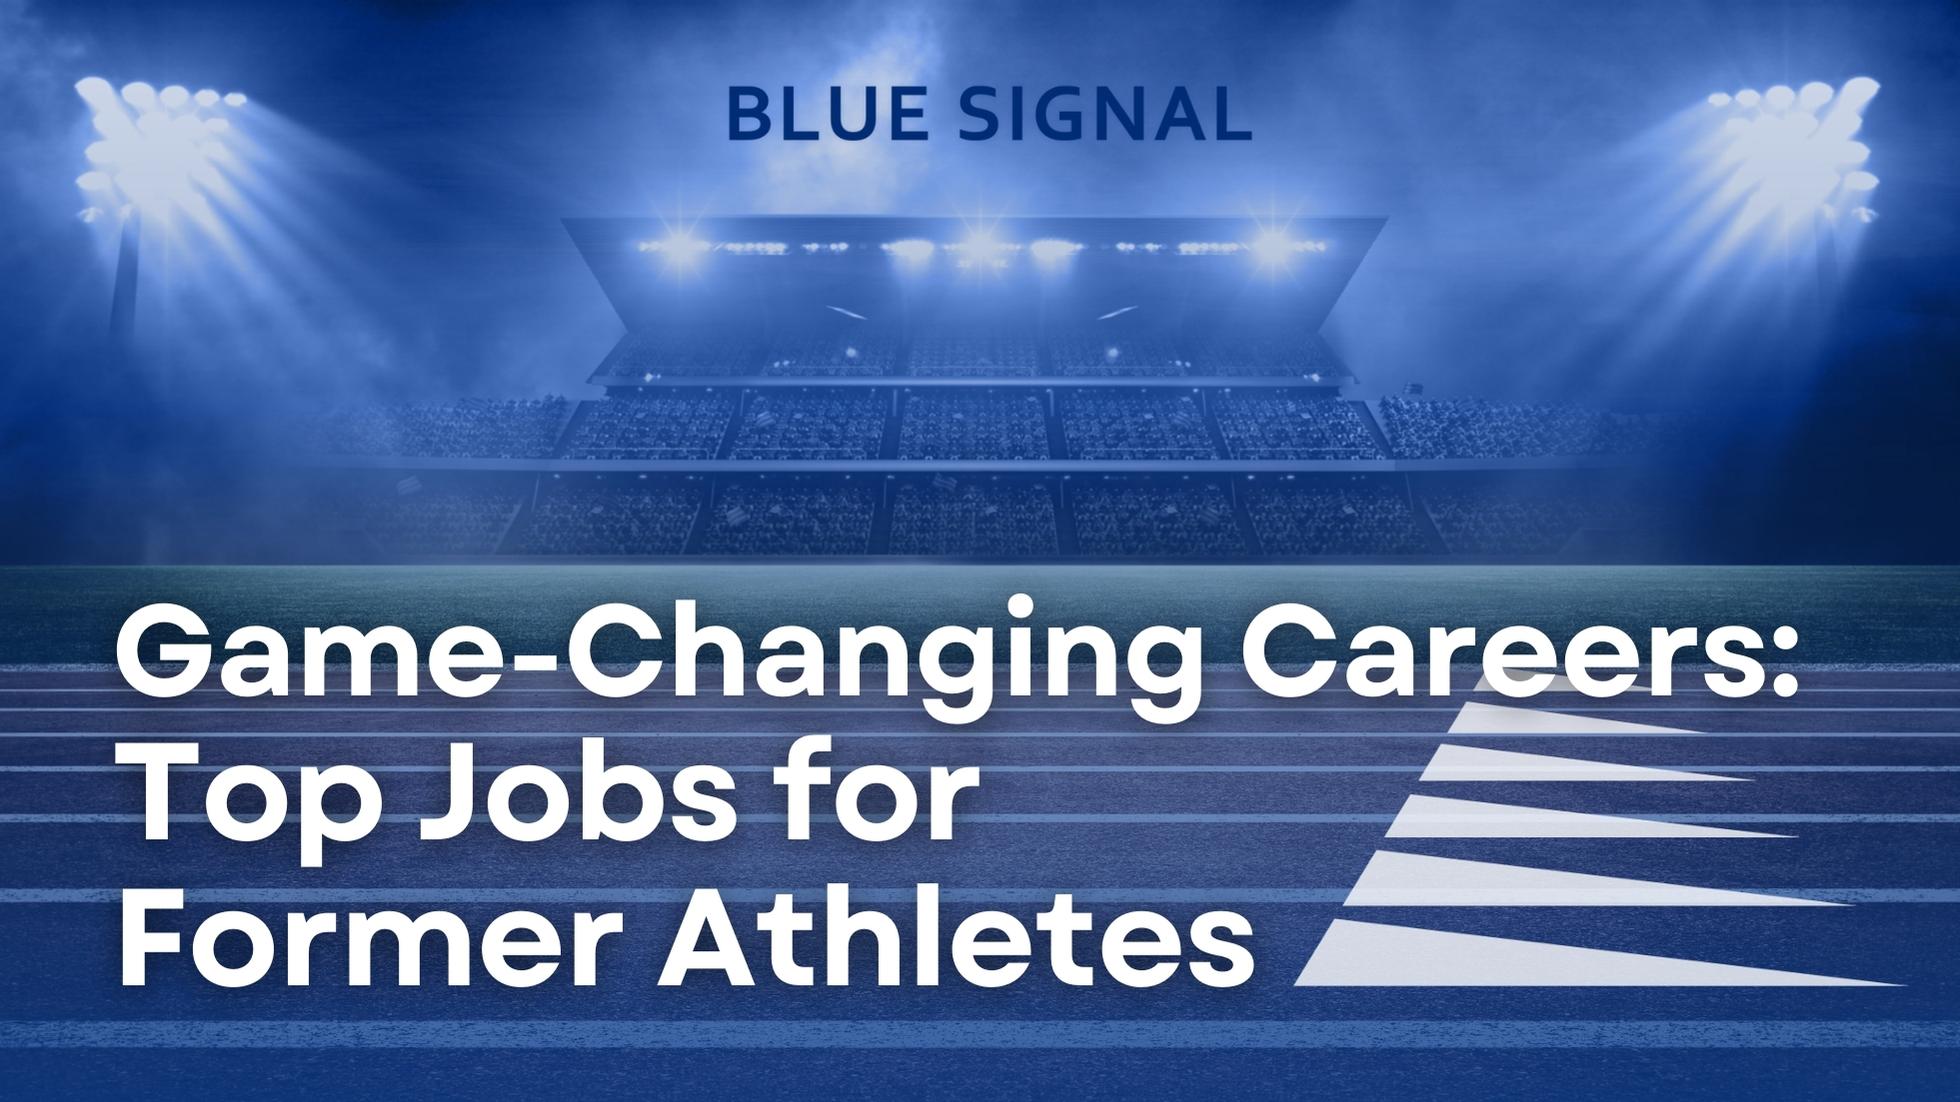 Blog title "Game-Changing Careers: Top Jobs for Former Athletes" displayed next to the Blue Signal logo with a track stadium in the background with a blue haze.